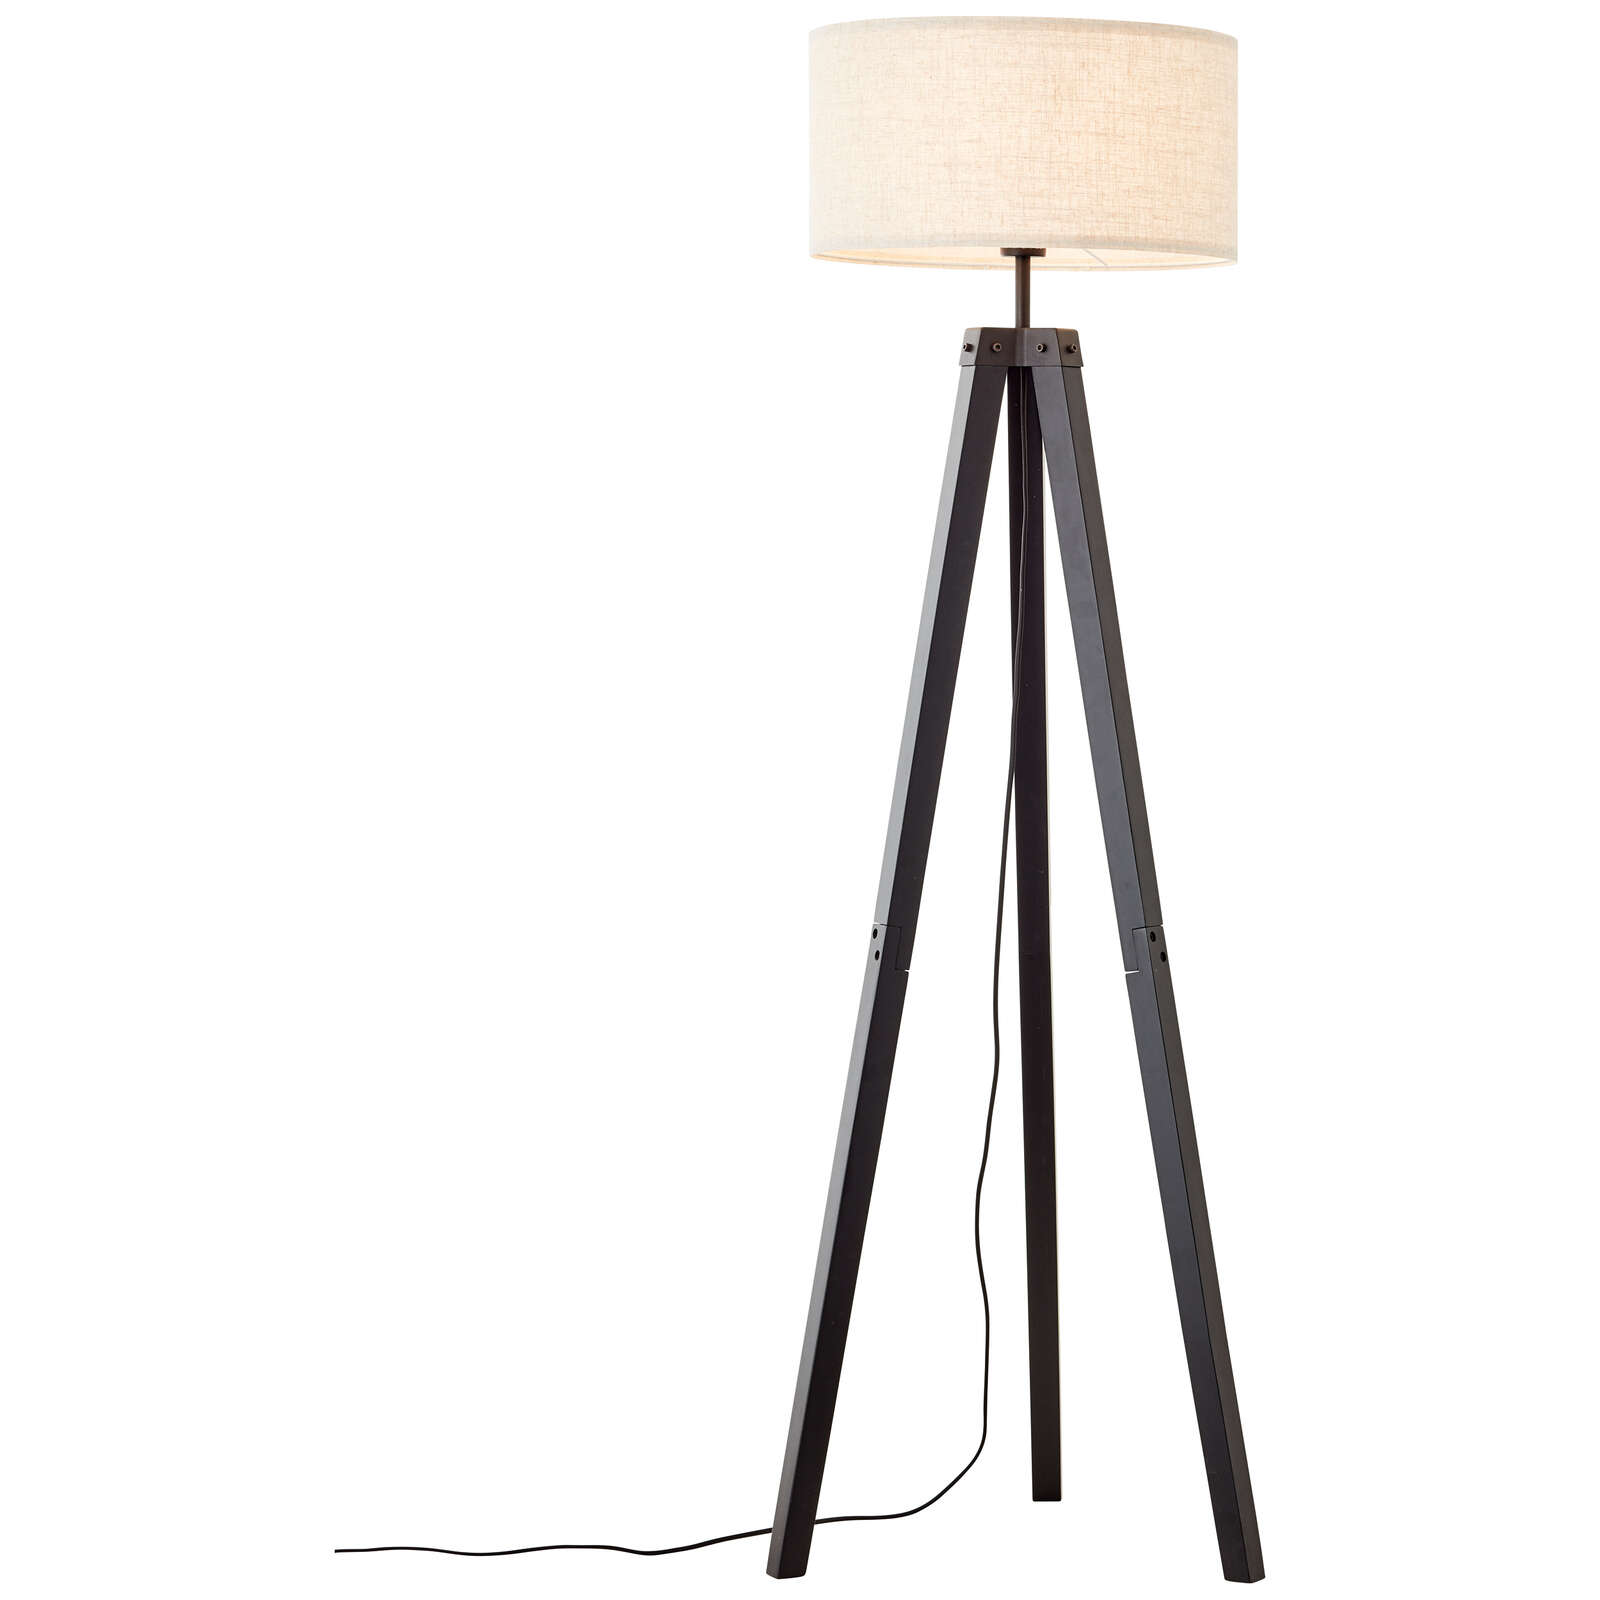             Floor lamp made of textile - Jack - Brown
        